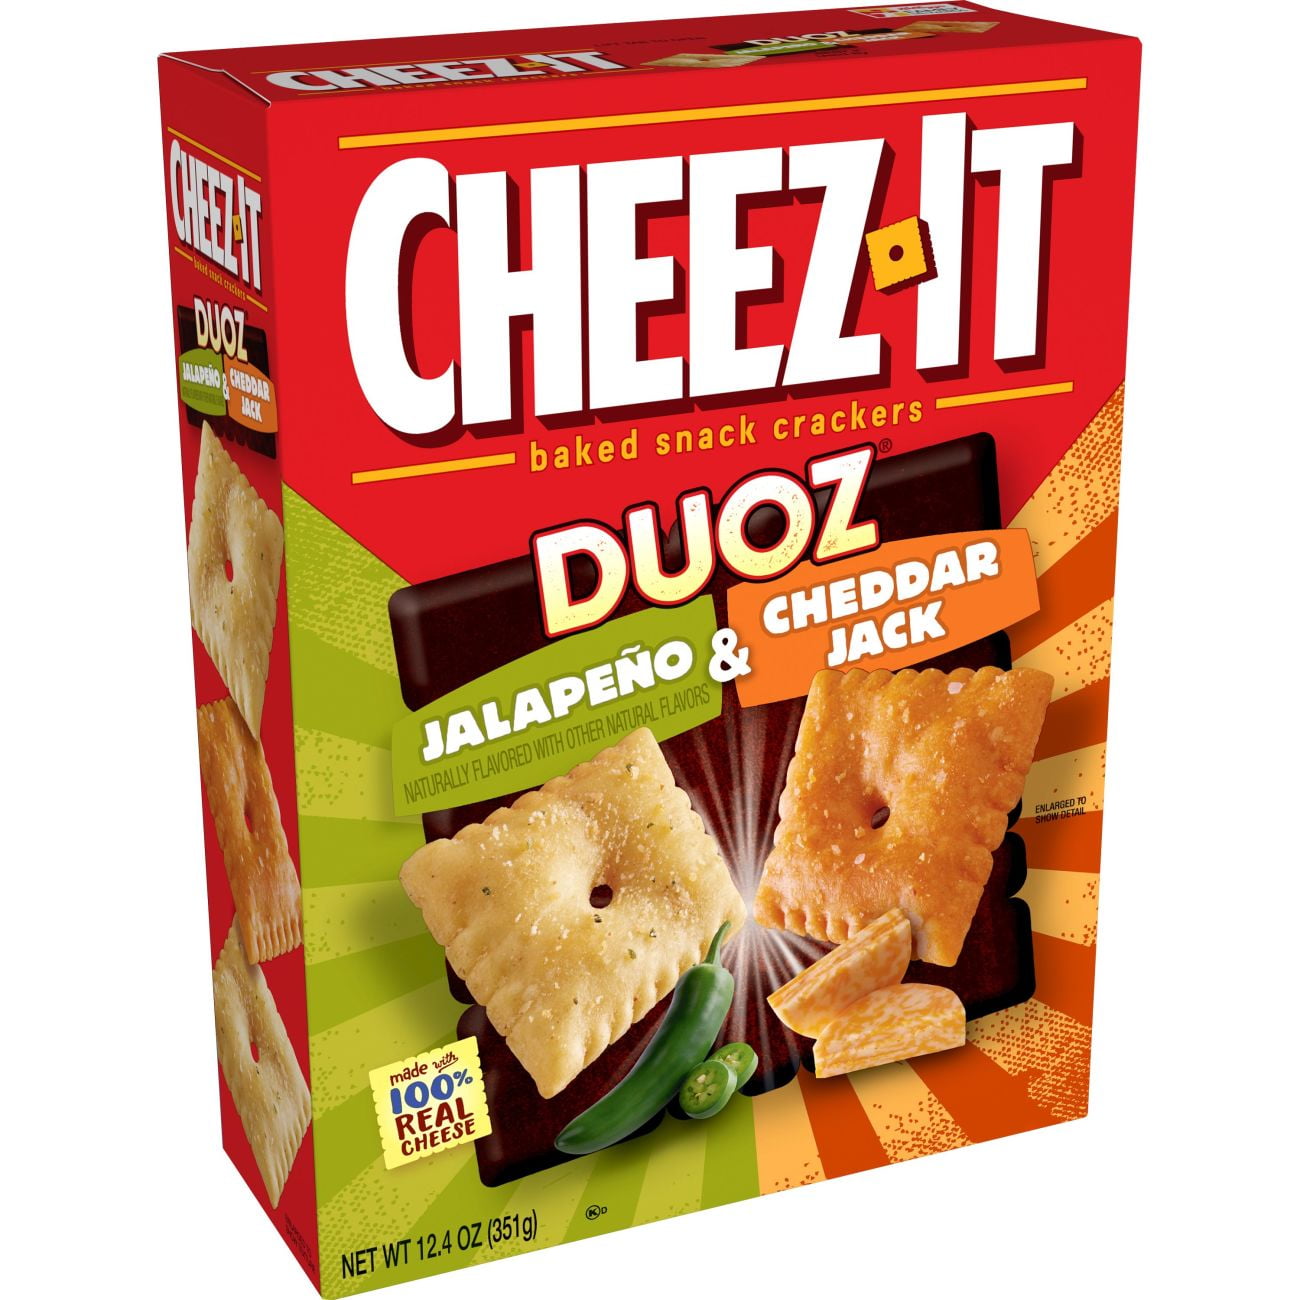 Cheez It Baked Snack Cheese Crackers Jalapeno Cheddar Jack